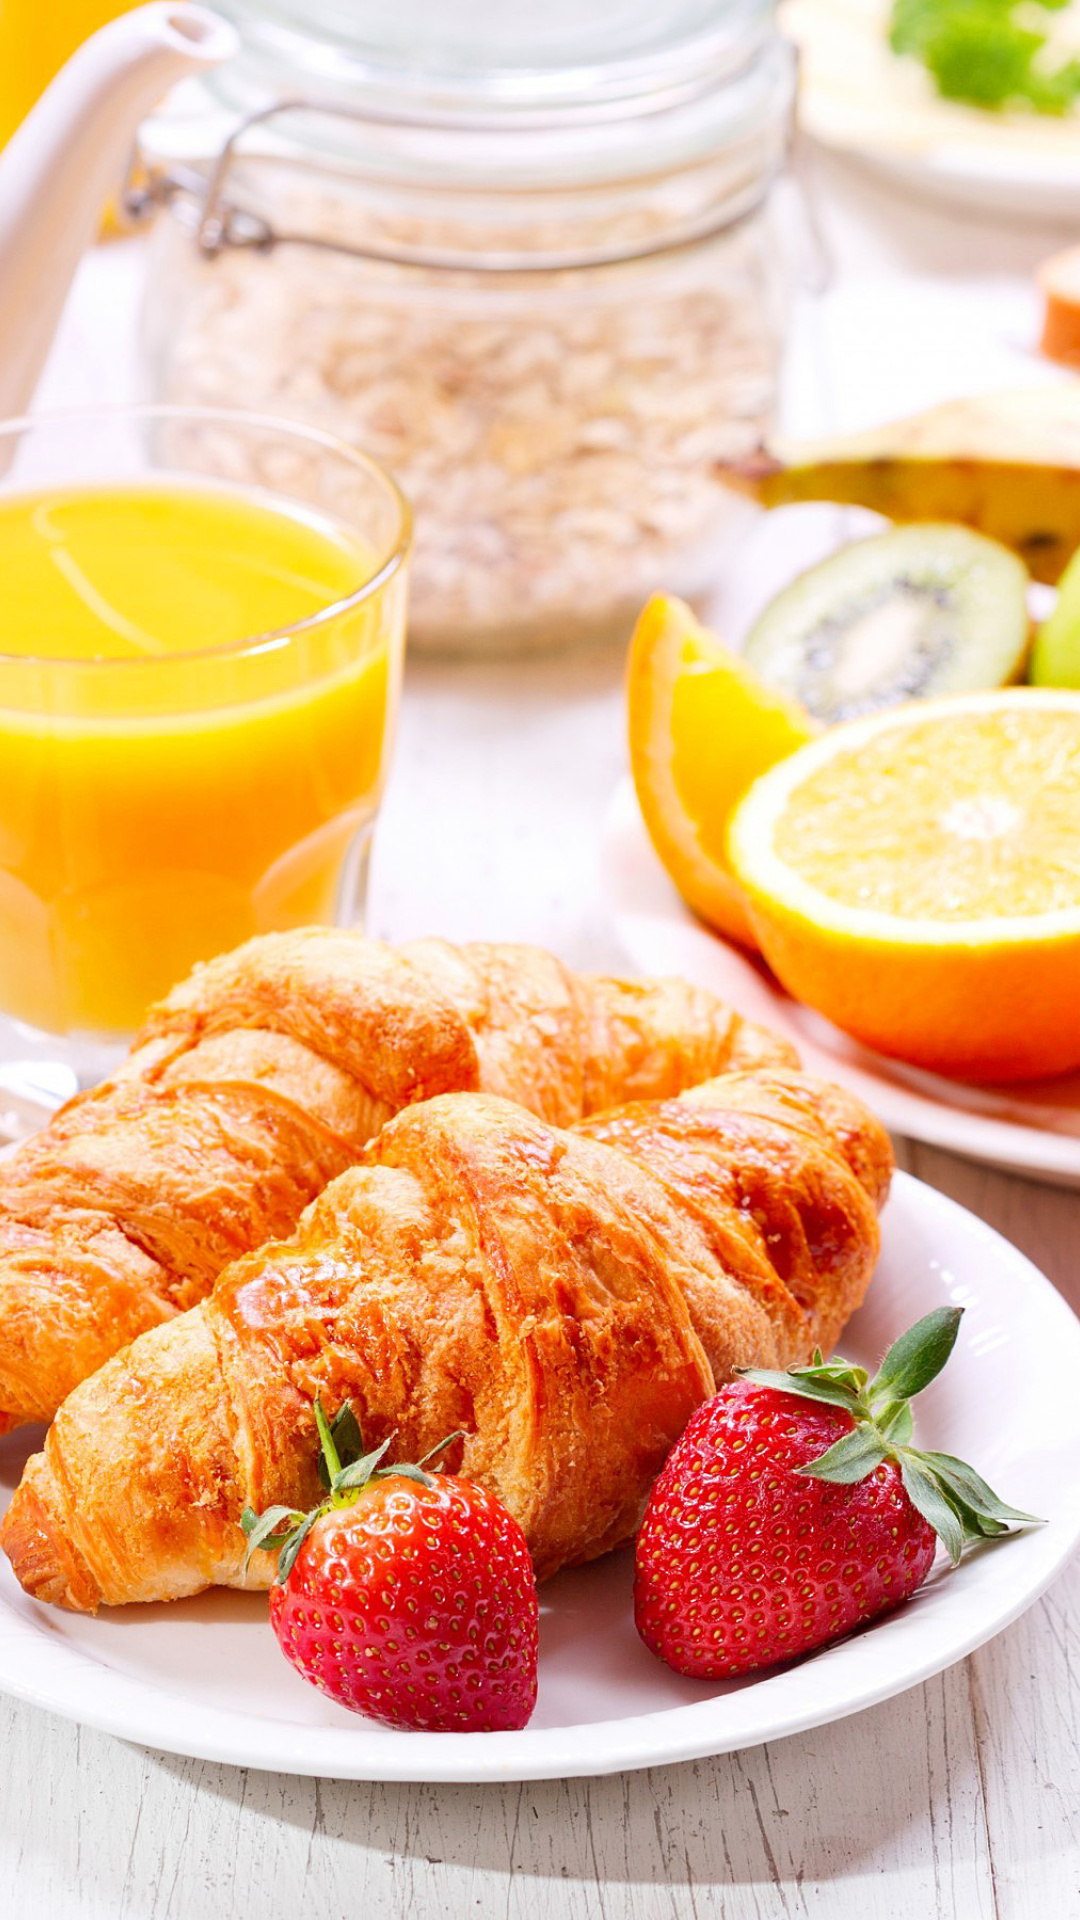 Das Breakfast with croissants and fruit Wallpaper 1080x1920